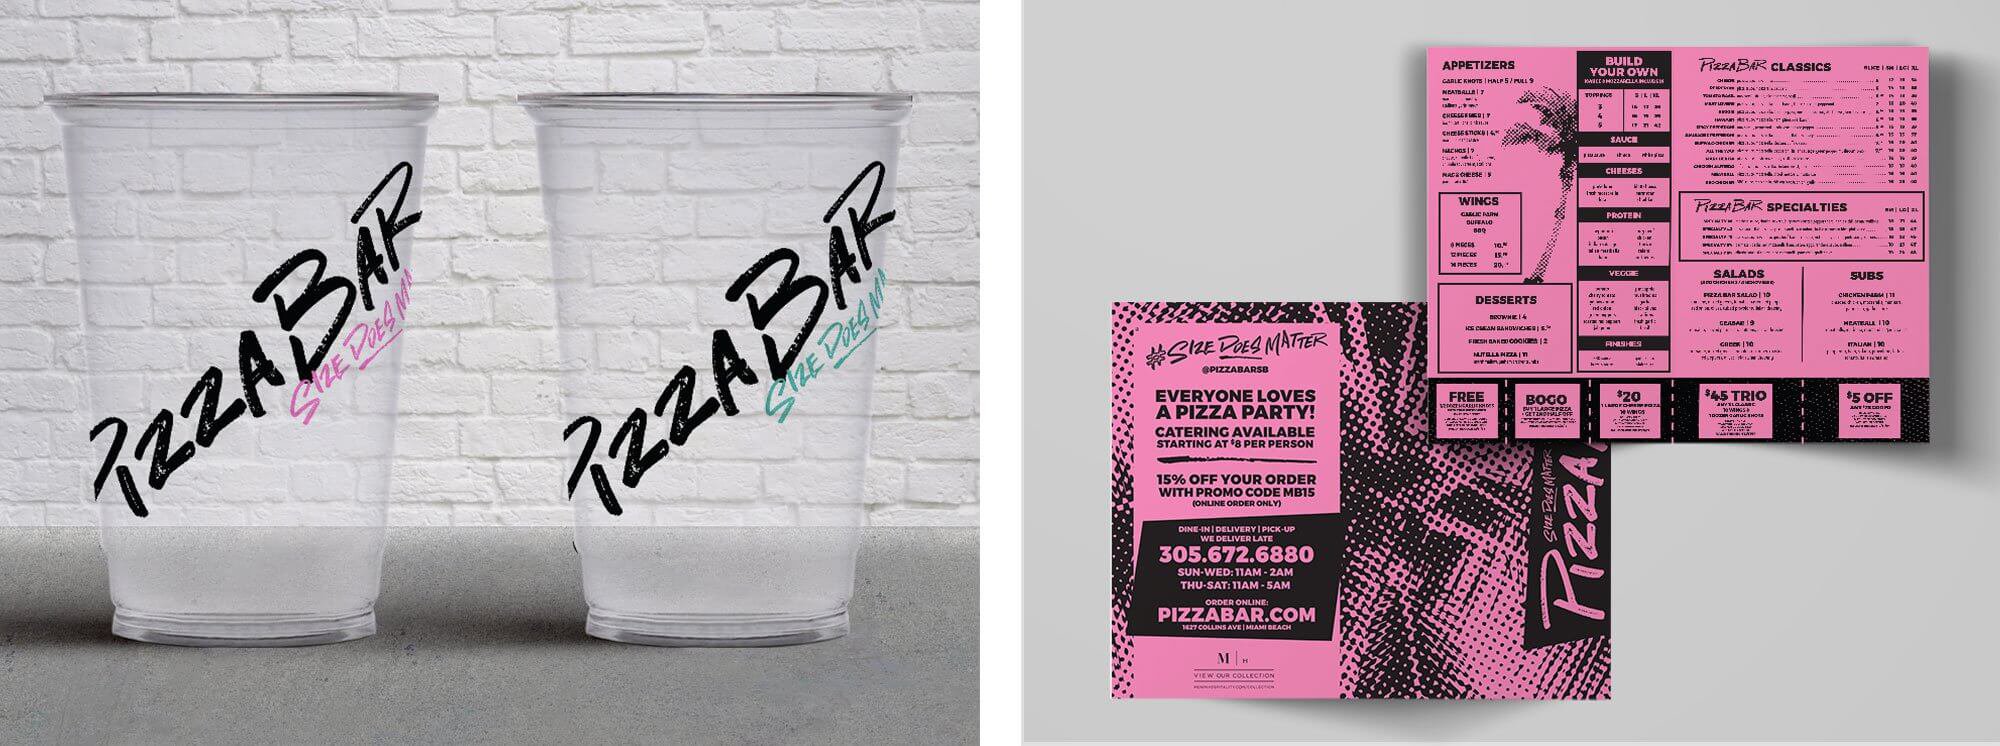 Pizza Bar branded cups